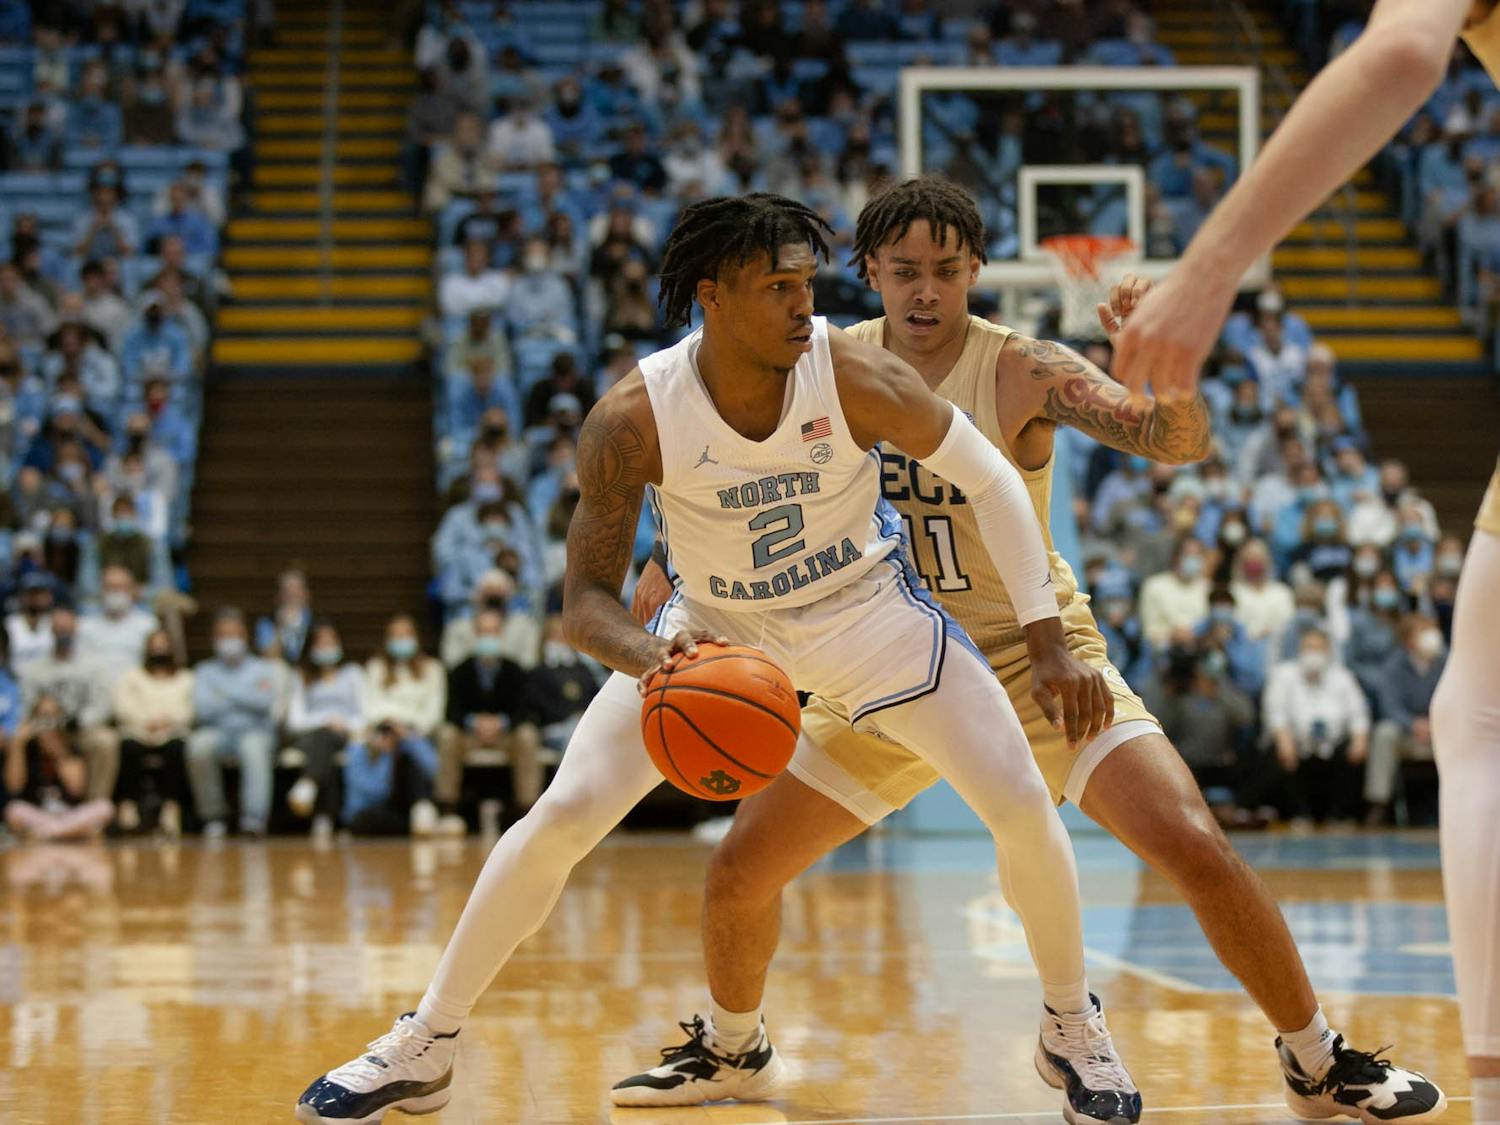 Sophomore Caleb Love (2) dribbles the ball at the game against Georgia Tech at the Dean Smith Center in Chapel Hill on Saturday, Jan. 15, 2022. UNC won 88-65.